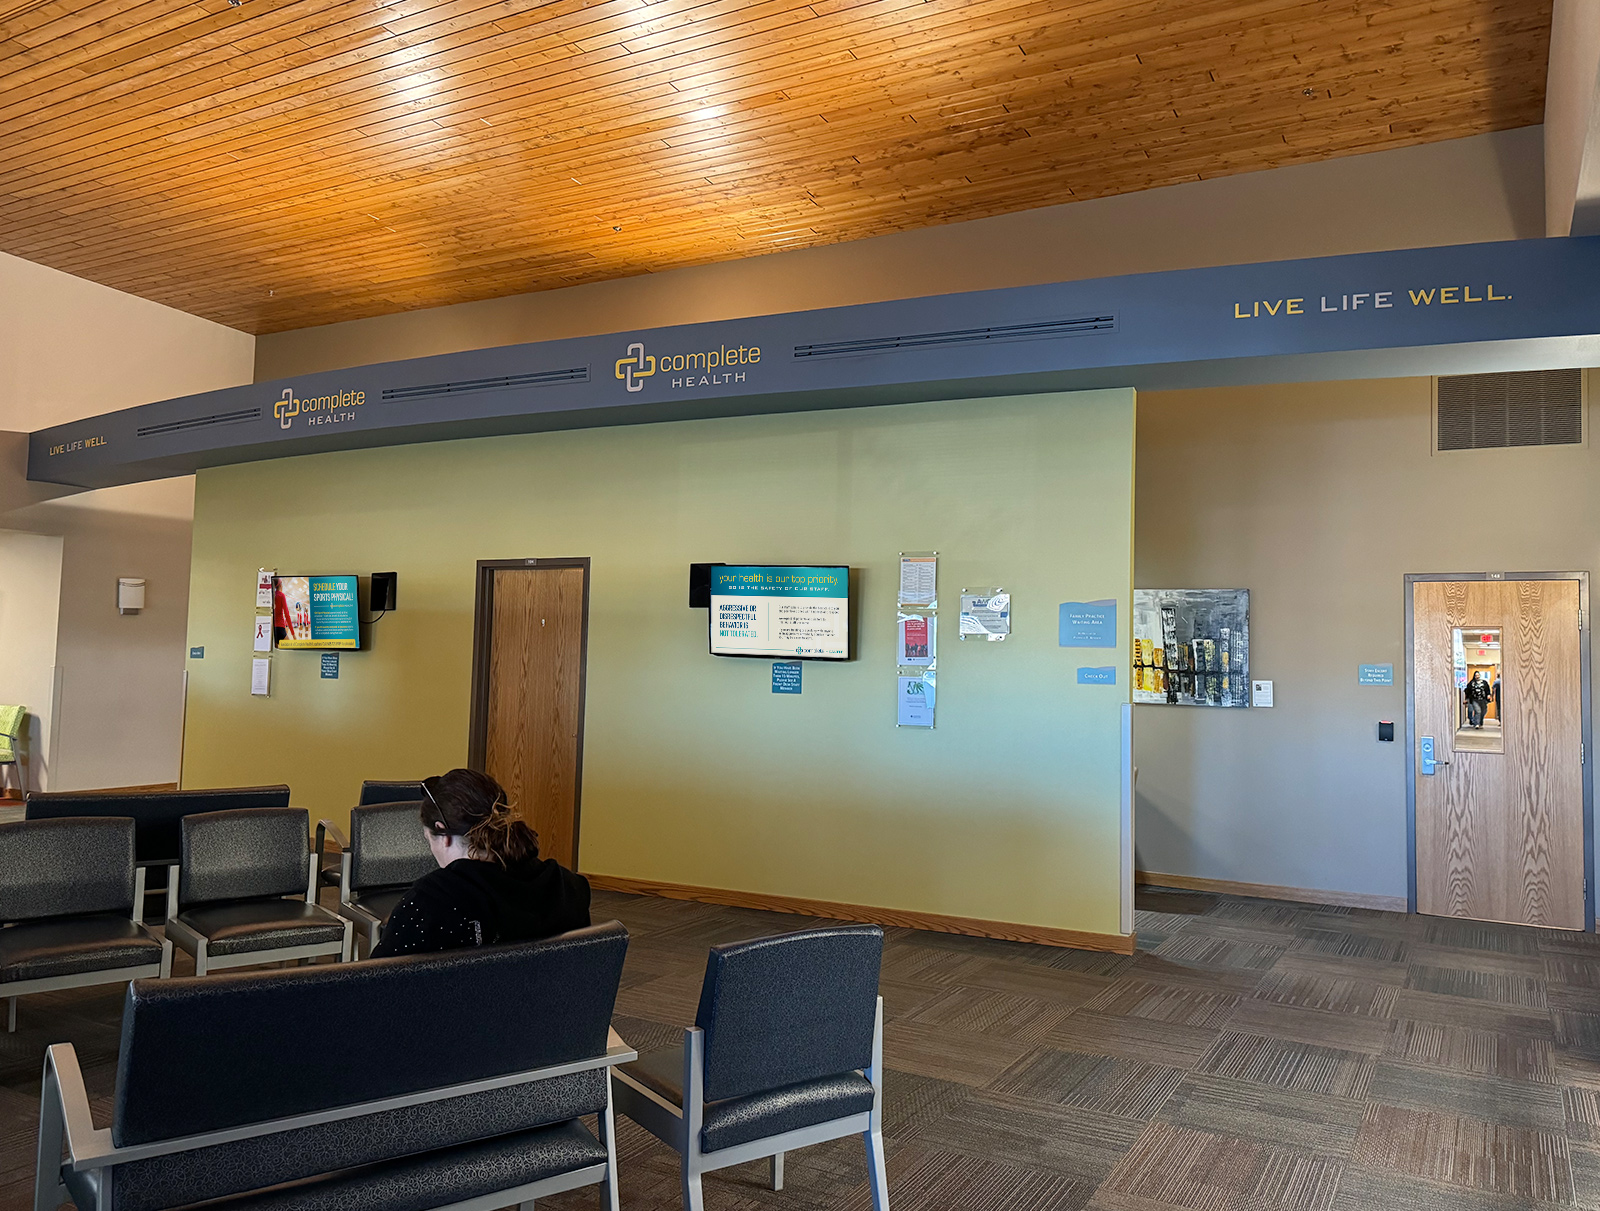 Complete Health Check-in Area Signage